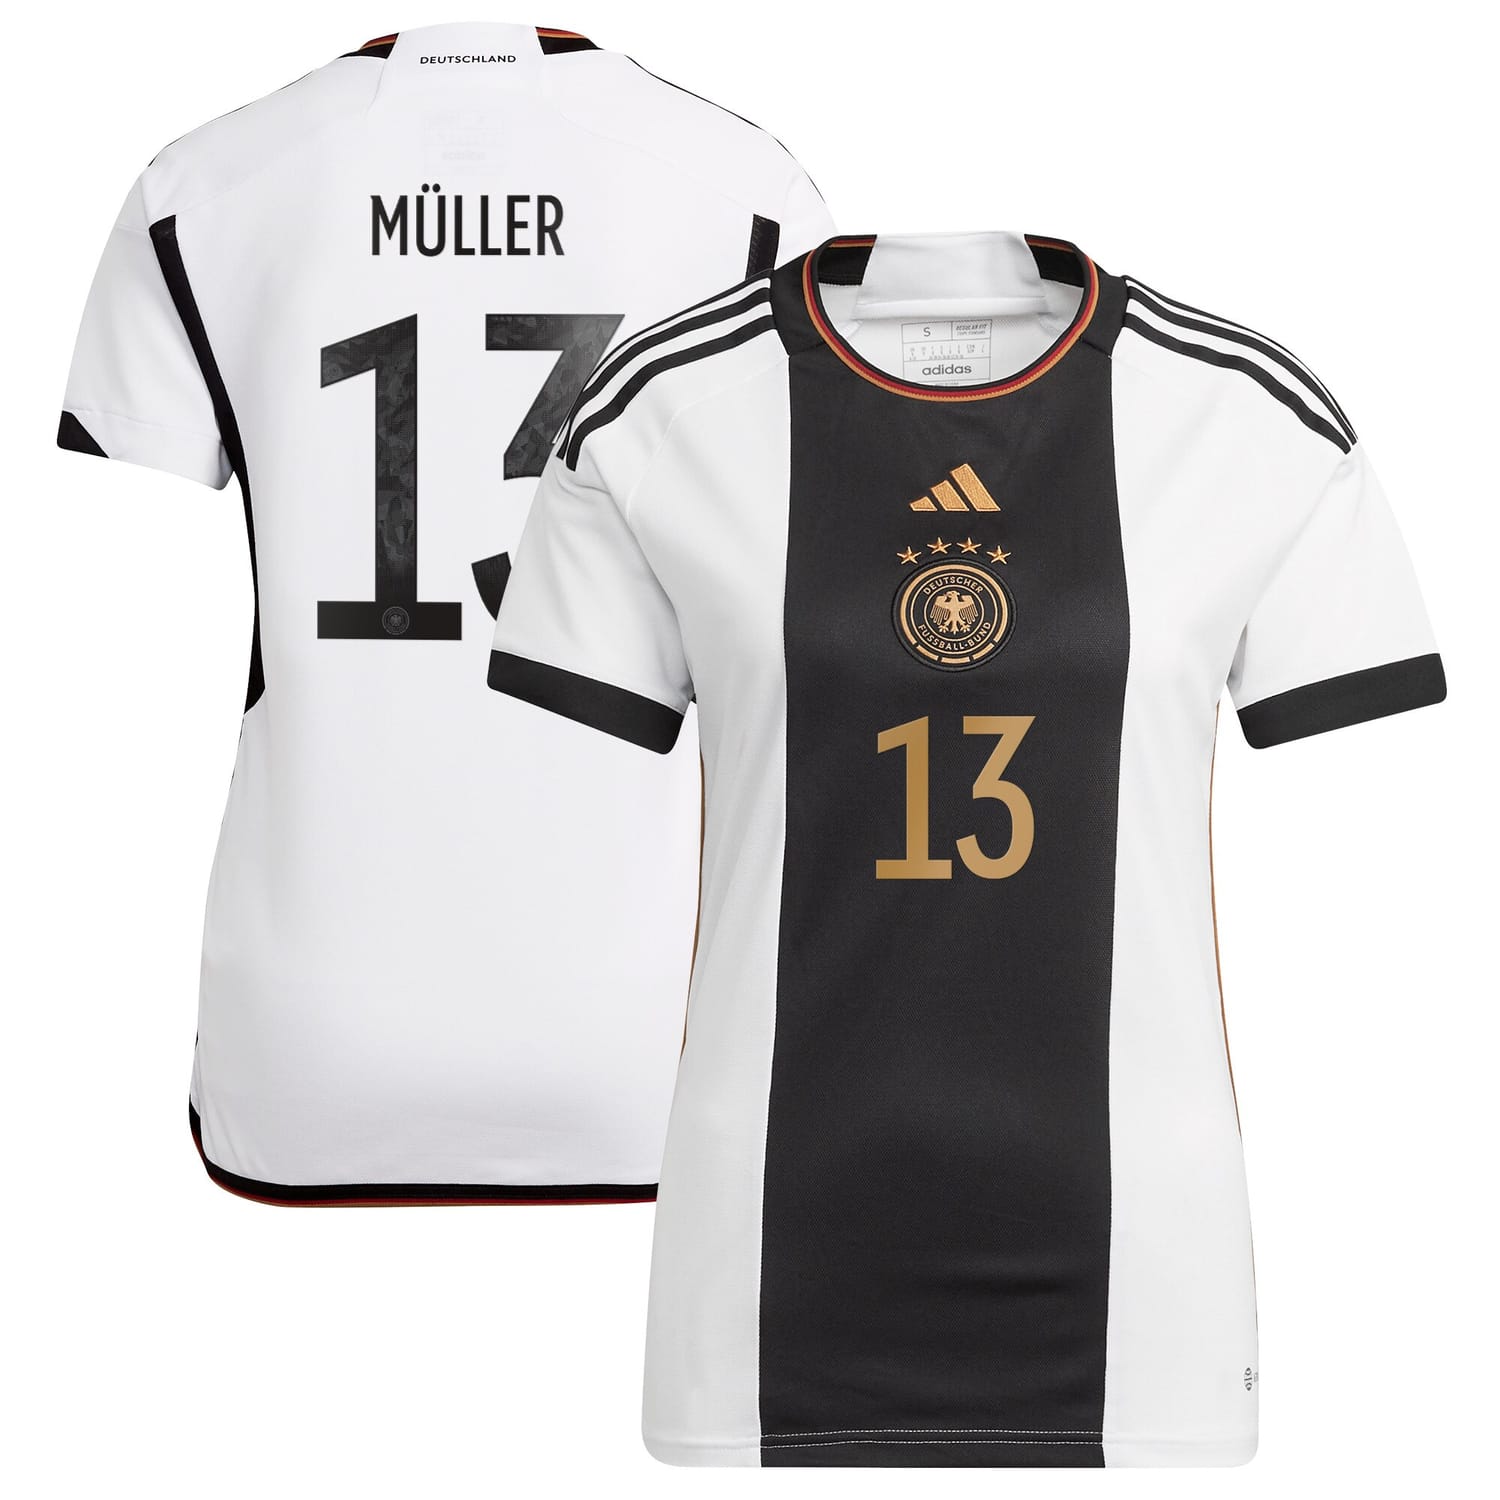 Germany National Team Home Jersey Shirt player Thomas Müller 13 printing for Women